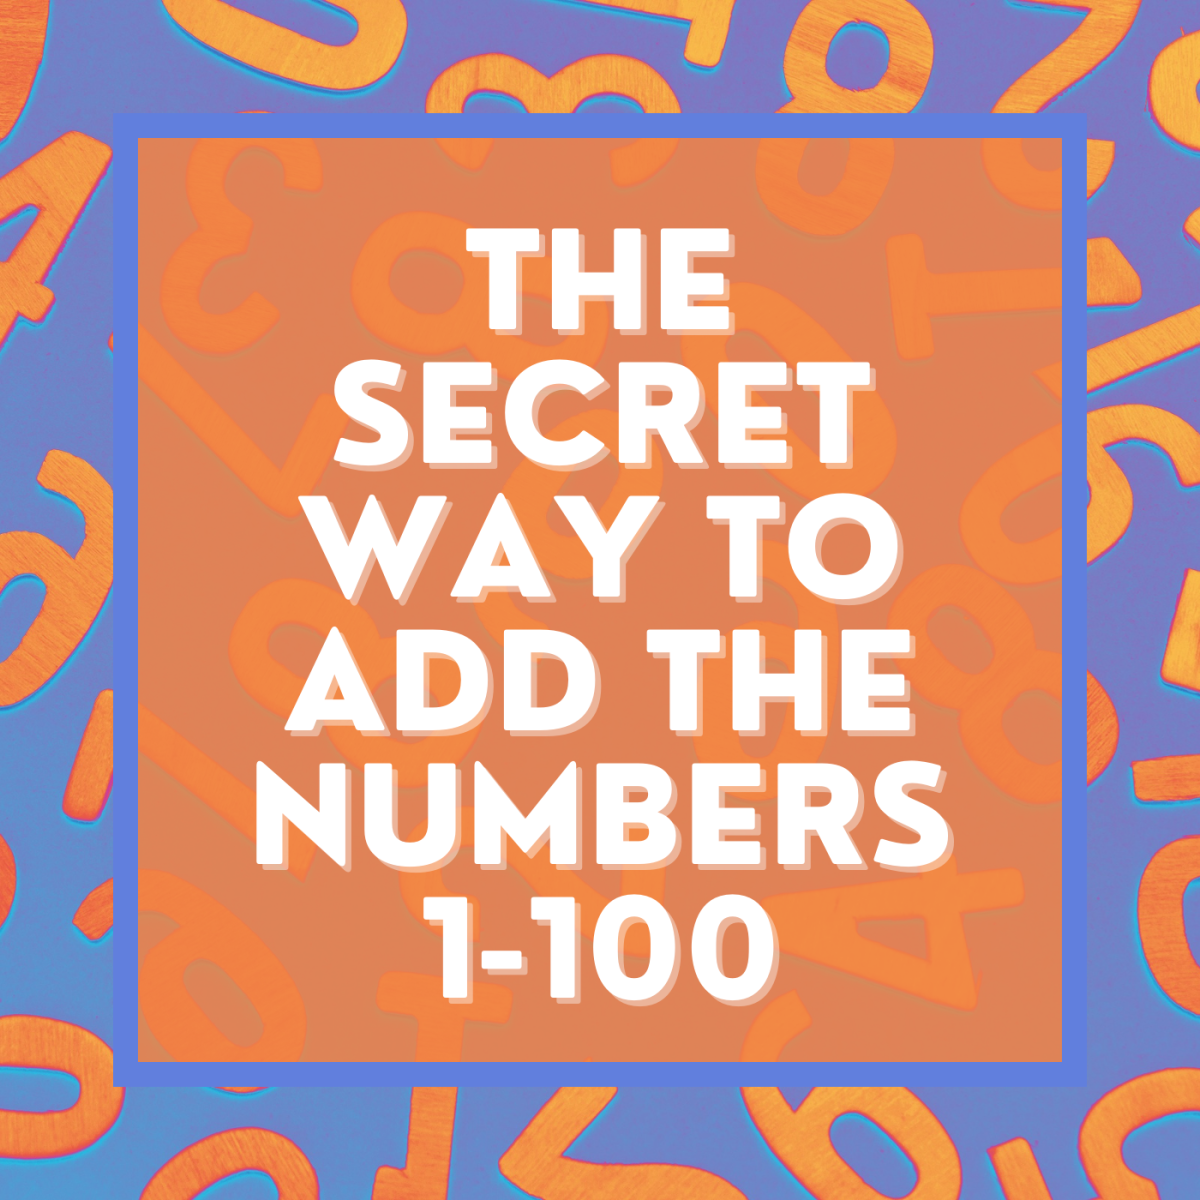 How to Add the Numbers 1-100 Quickly: Summing Arithmetic Sequences